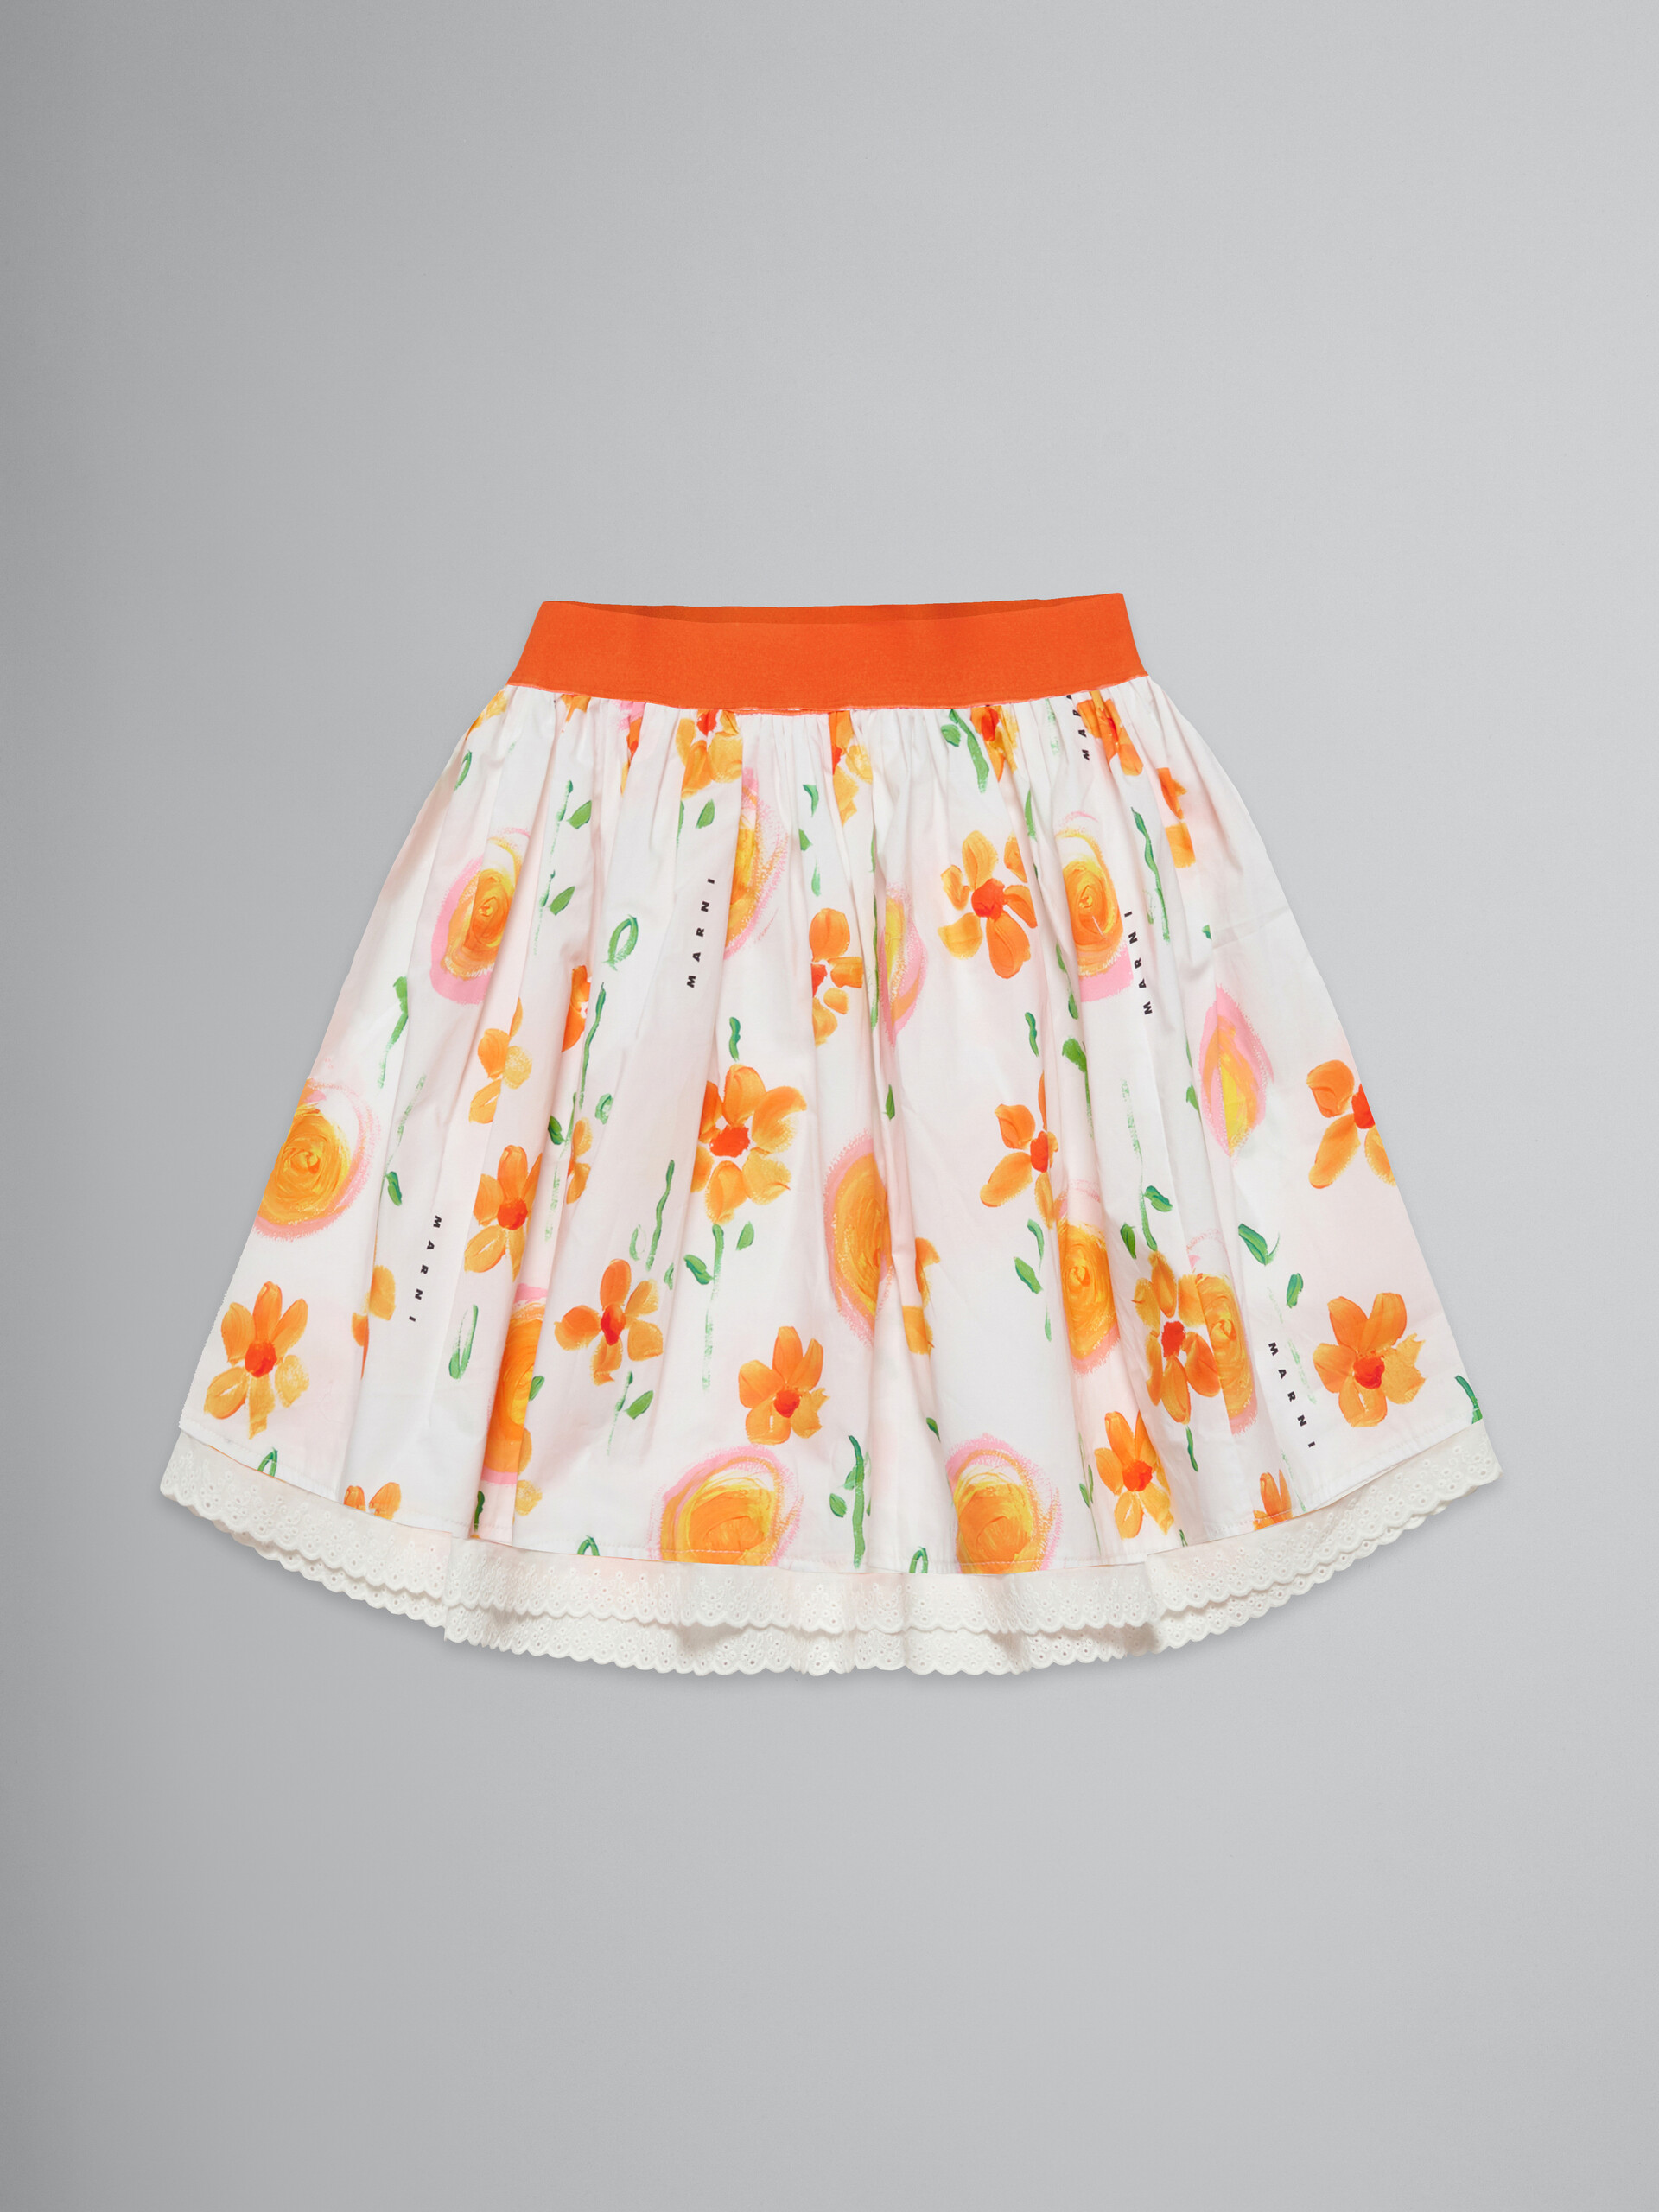 White poplin skirt with Sunny Day - Skirts - Image 1